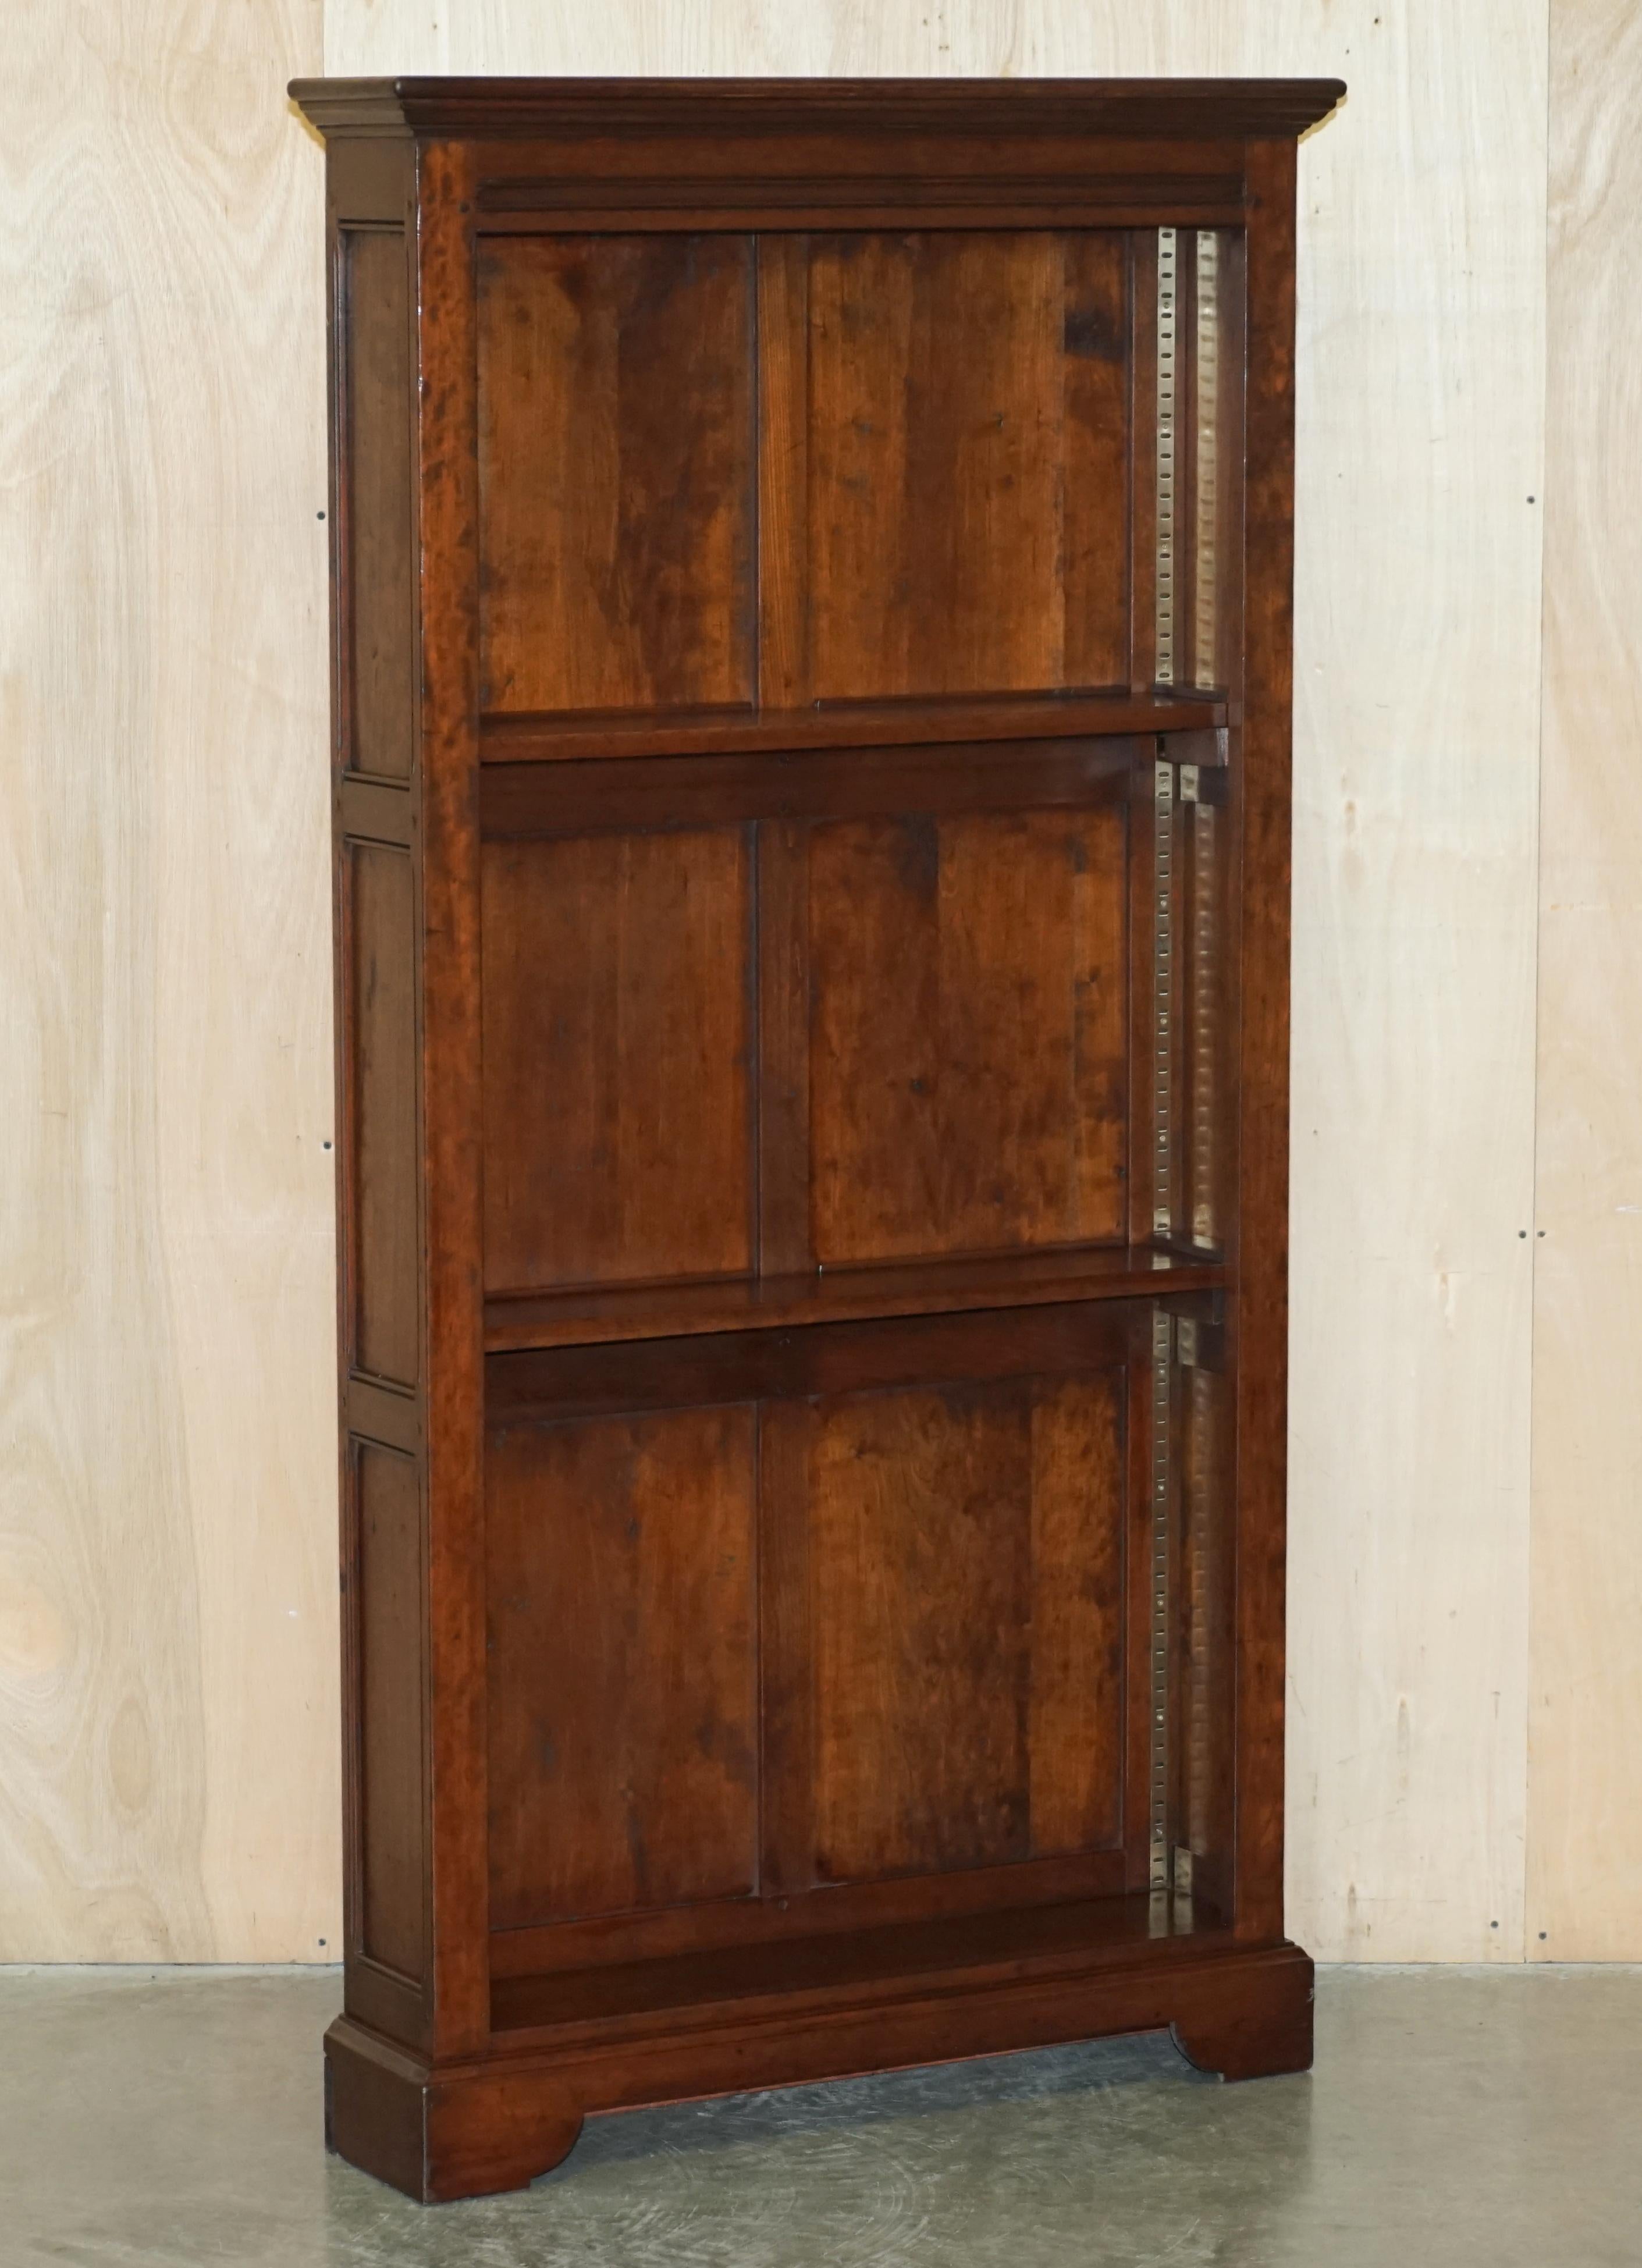 PAIR OF OPEN LIBRARY HARDWOOD BOOKCASES PANELLED SiDES HEIGHT ADJUSTABLE SHELVES For Sale 11